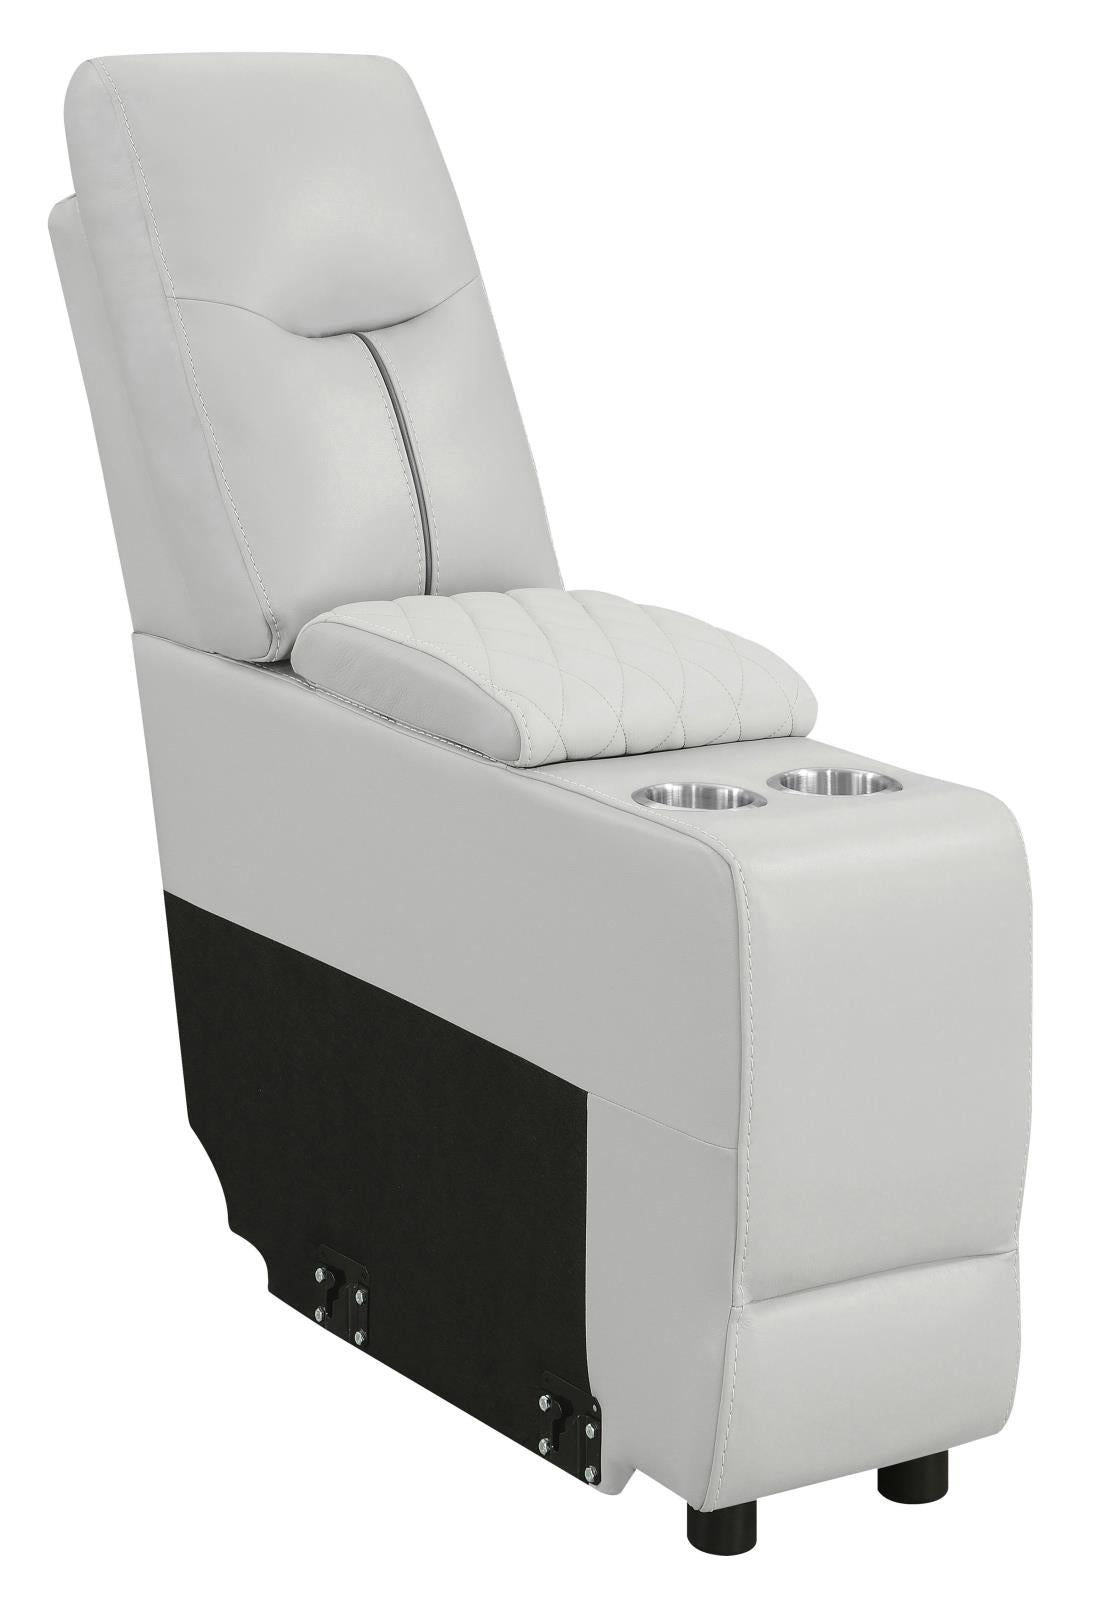 Garnet Upholstered Power Reclining Seat and Power Headrest Home Theater Light Grey - What A Room